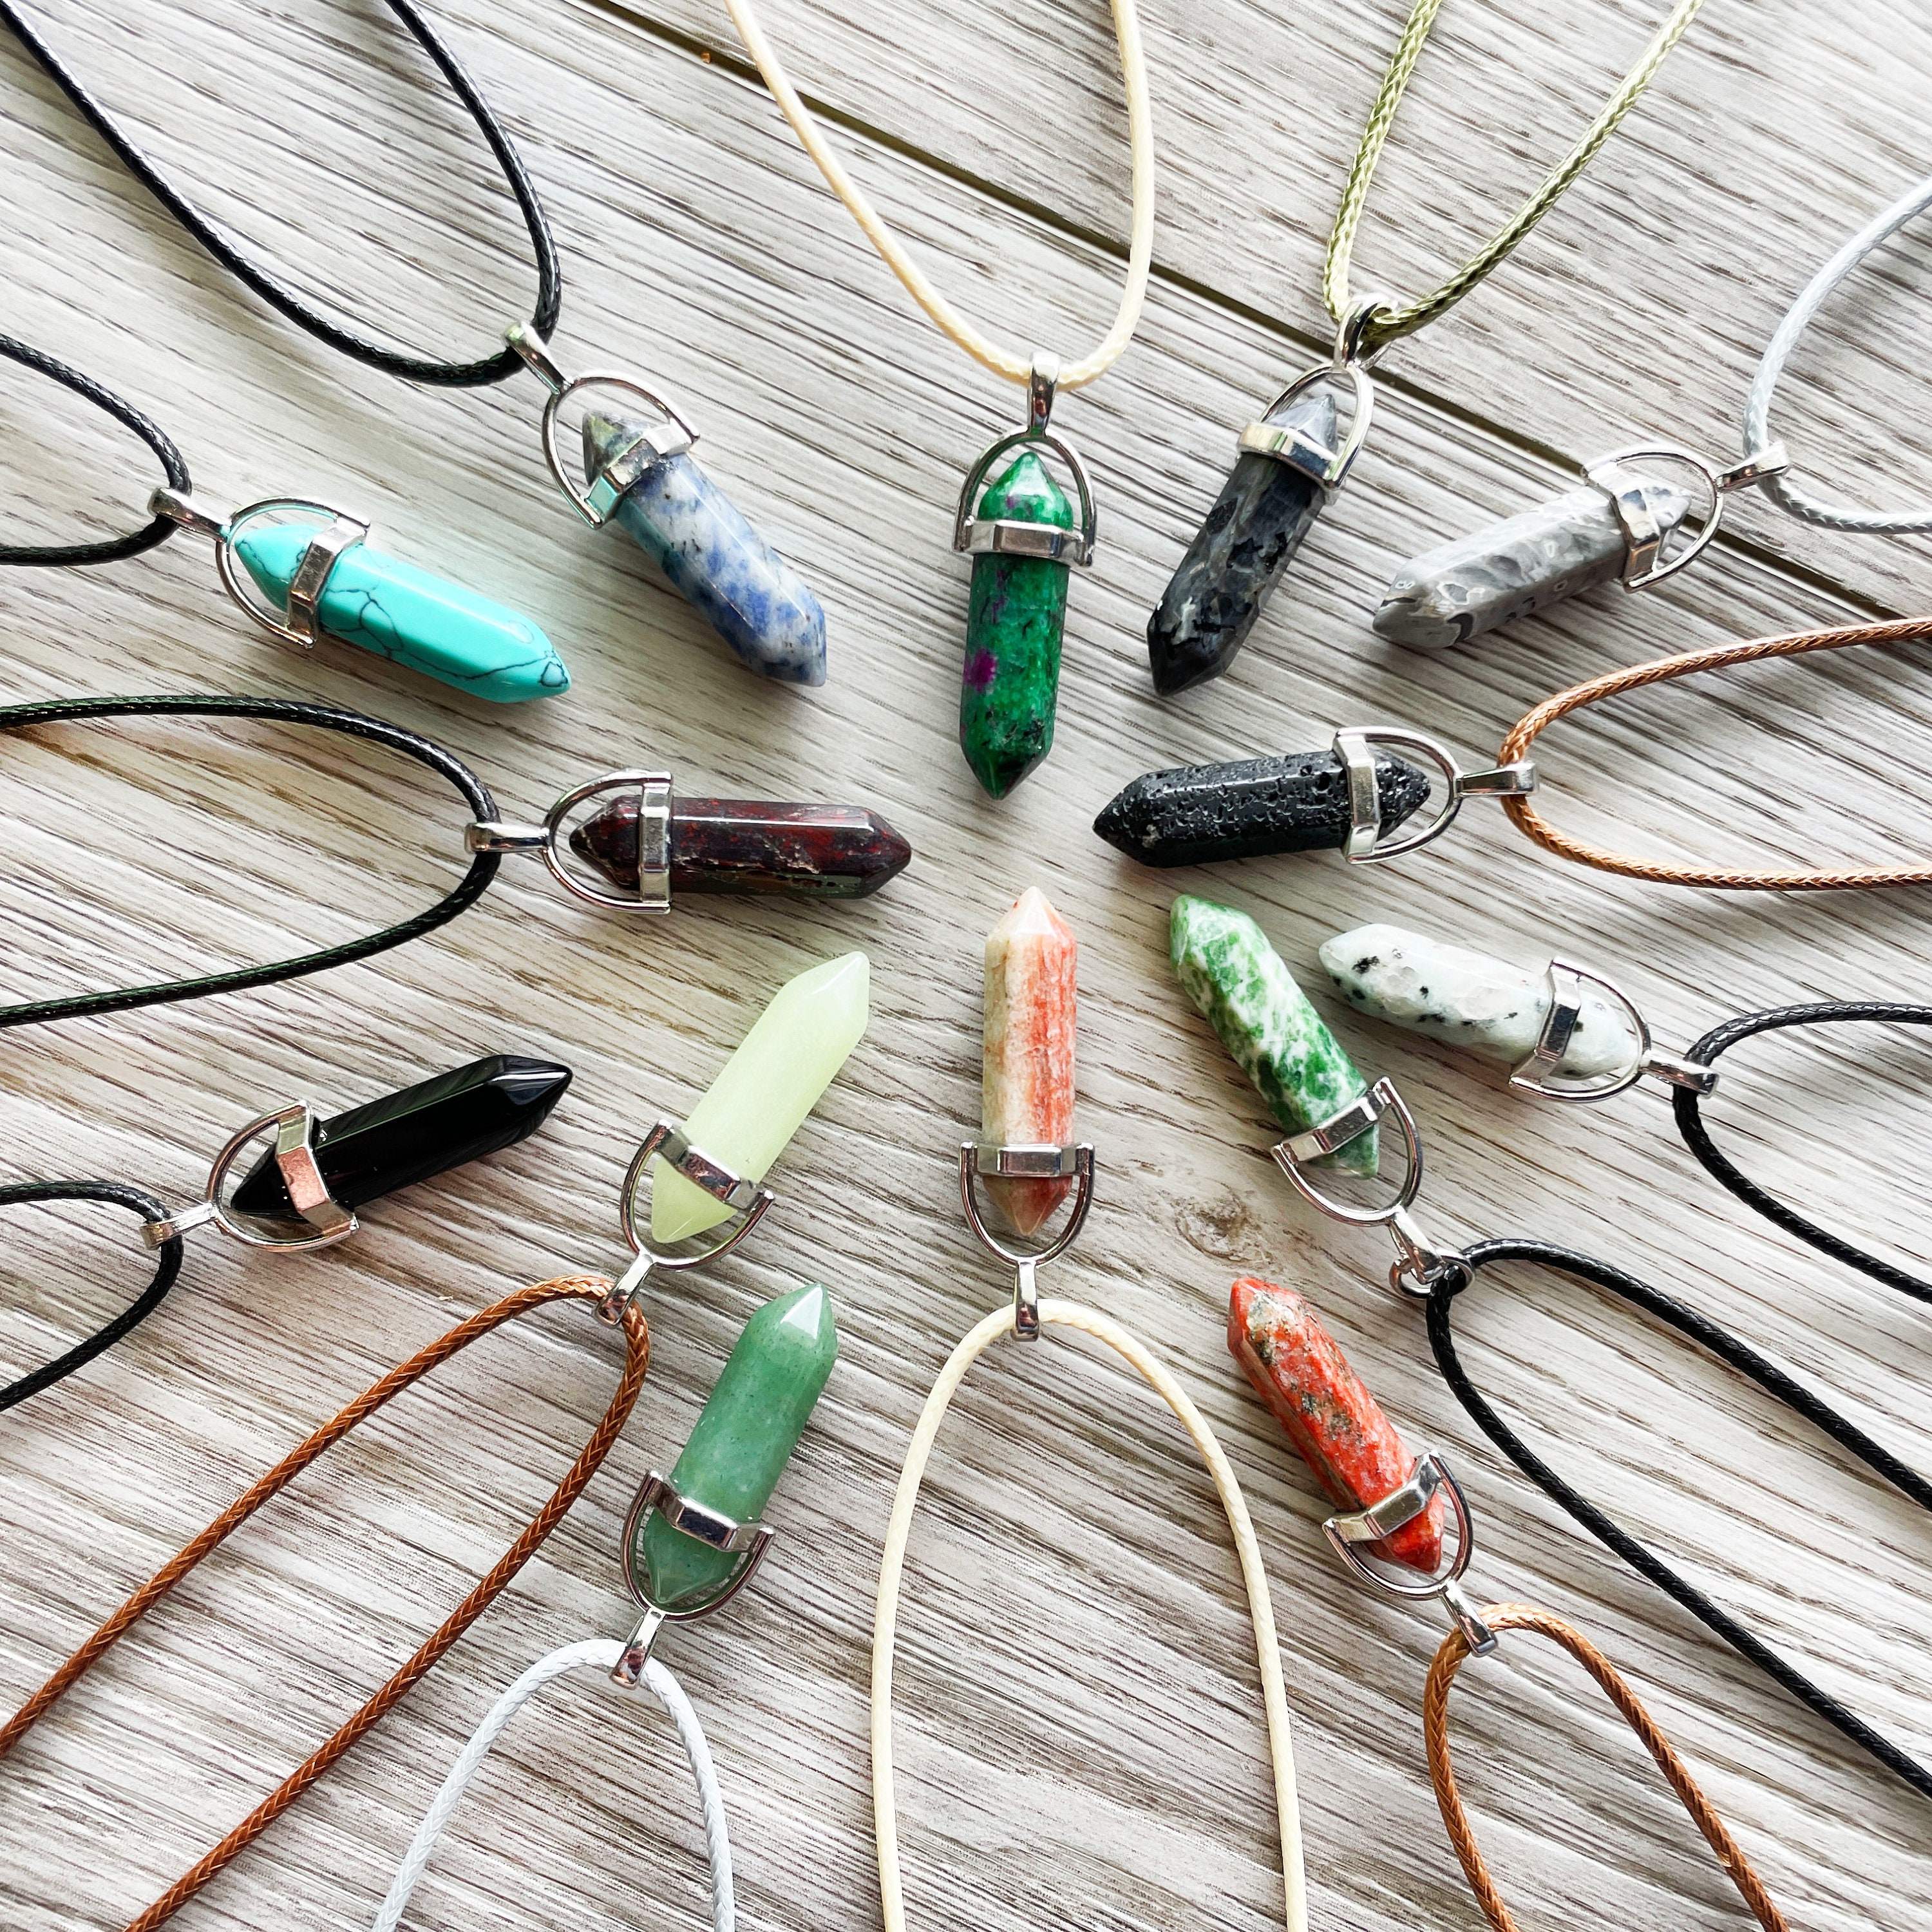 1pc/10pcs Natural Crystal Tumble Pendant Black Leather Cord Chain Necklace  Chakra Healing Stone Polished Tumbles Cubes Ropes Bulk Necklaces Gemstone  Charm Necklaces For Mother's/Father's Day Family Gifts Chakra Jewelry  Making